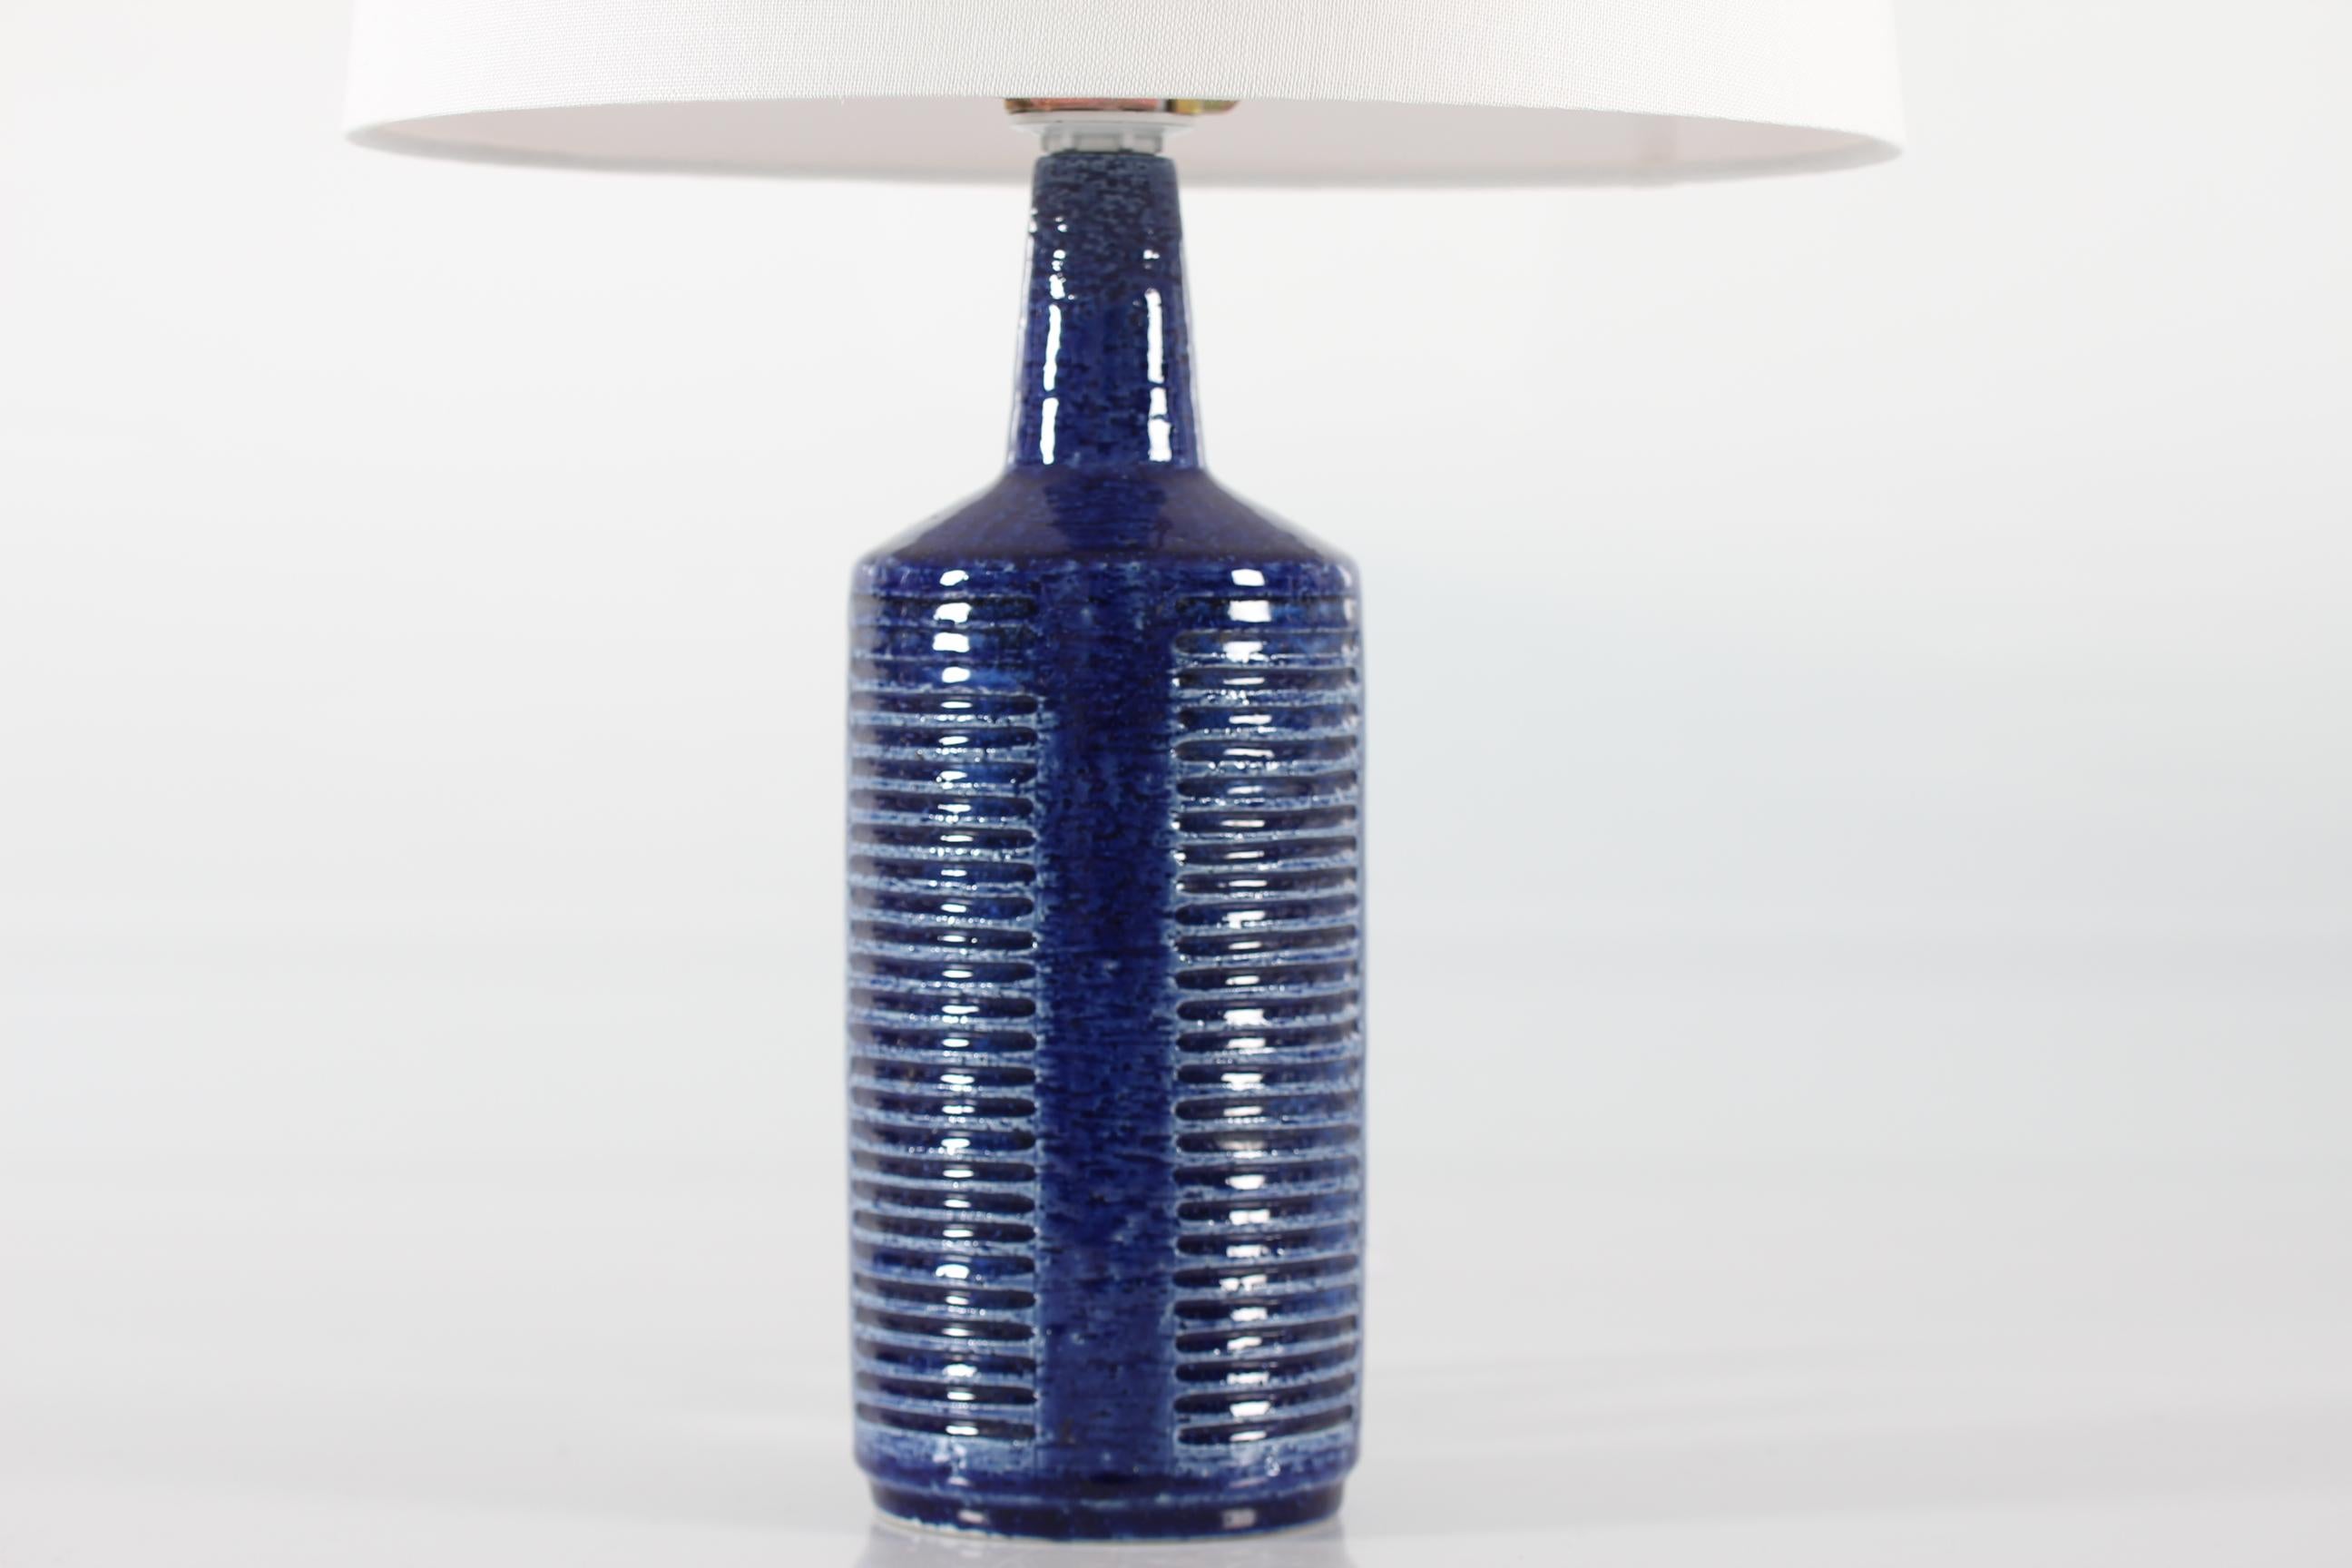 Midcentury table lamp from Danish Palshus model no. DL30.
The lamp was designed by Per Linnemann-Schmidt and produced, circa 1960s.
It is made of chamotte clay which gives a rough and vivid surface. The glaze is cobalt blue.

Included is a new